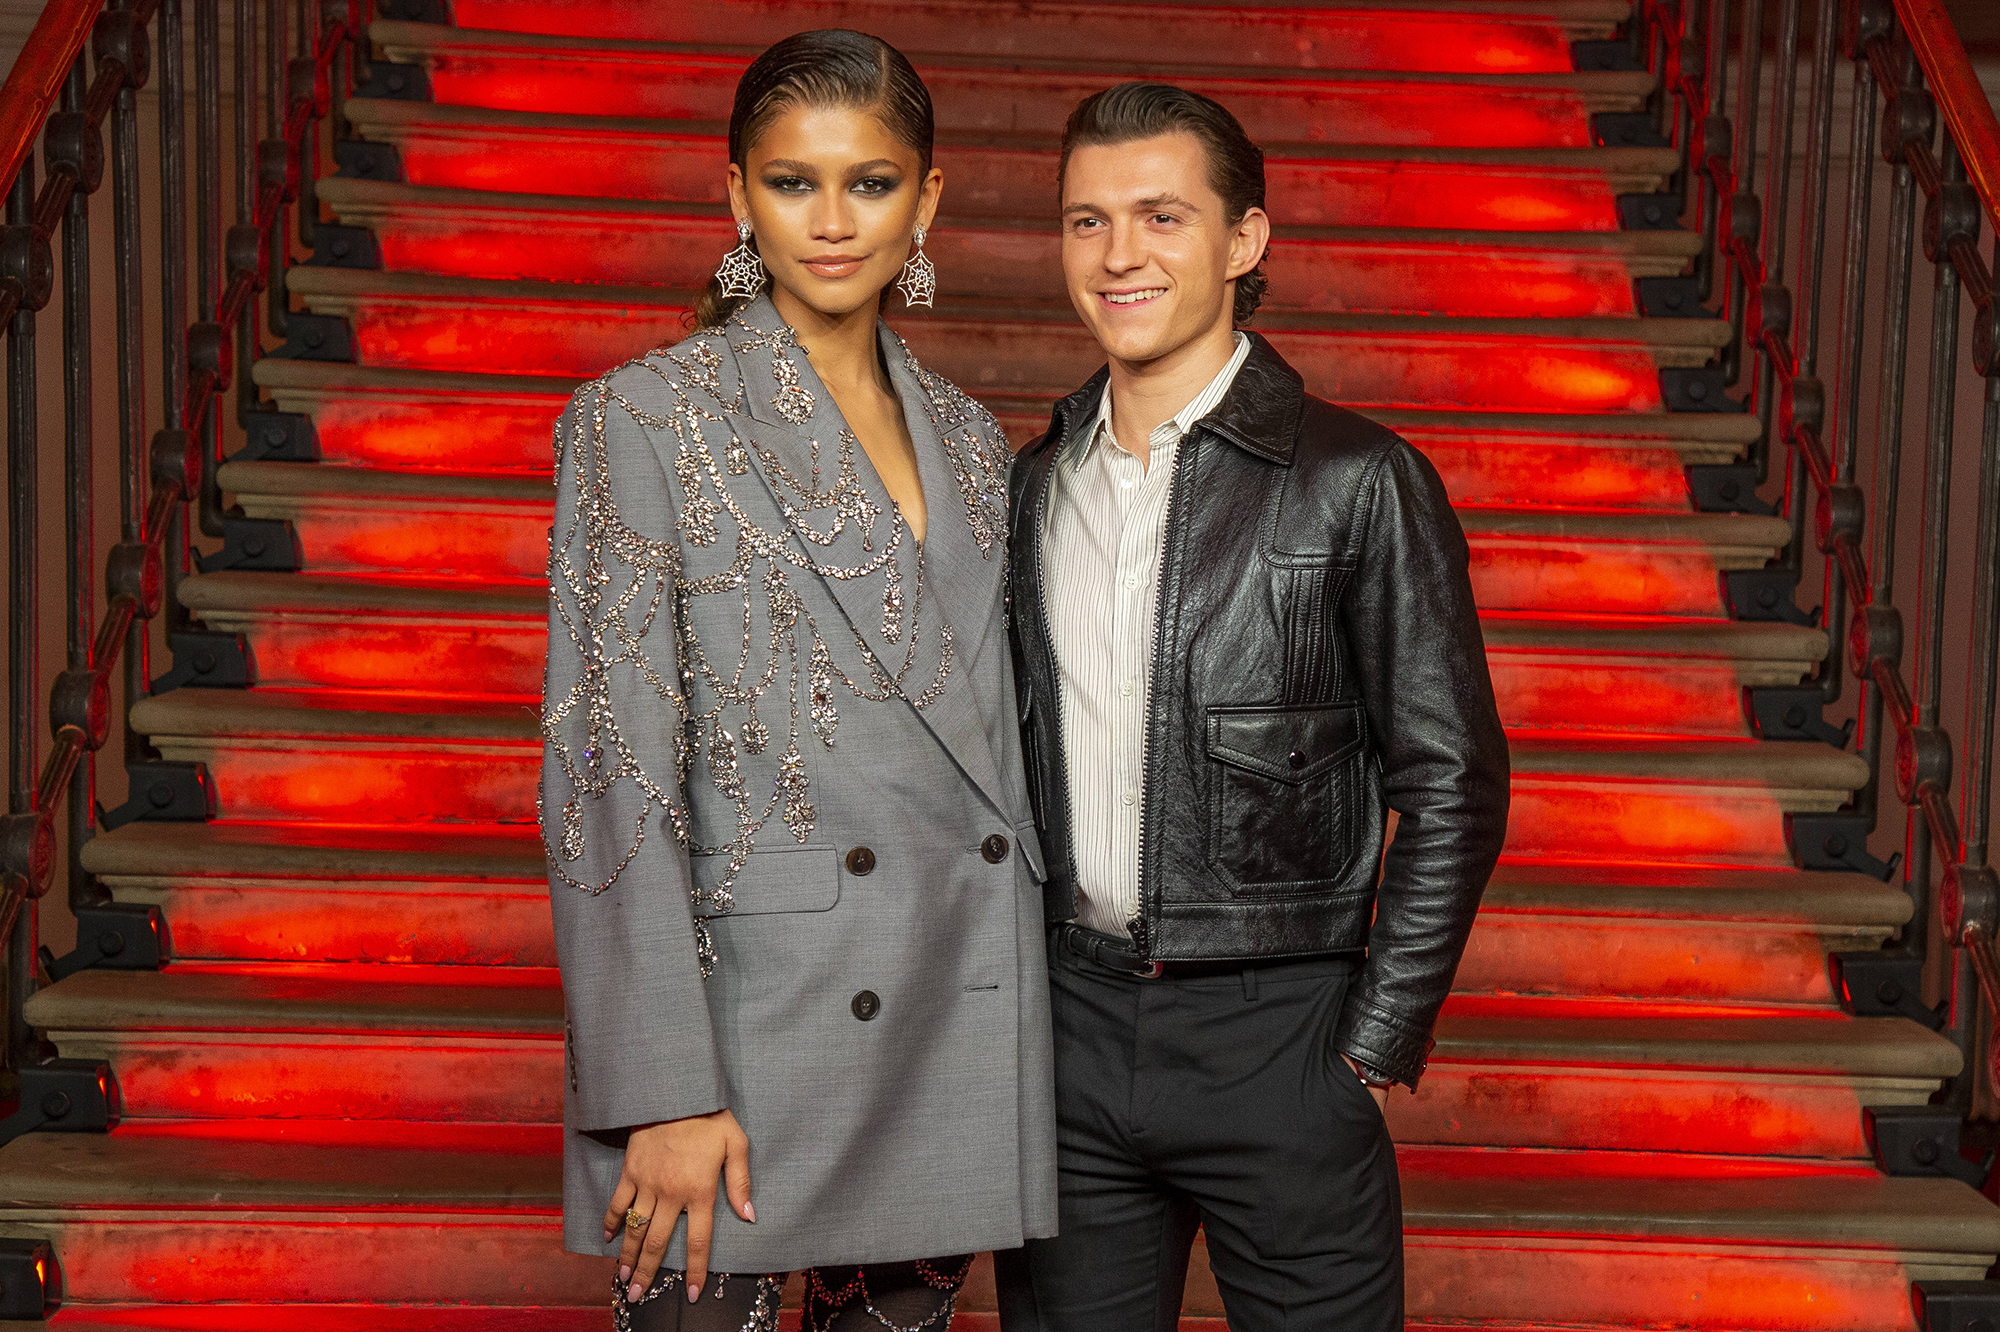 Tom Holland And Zendaya 'Planning For A Real Future Together'